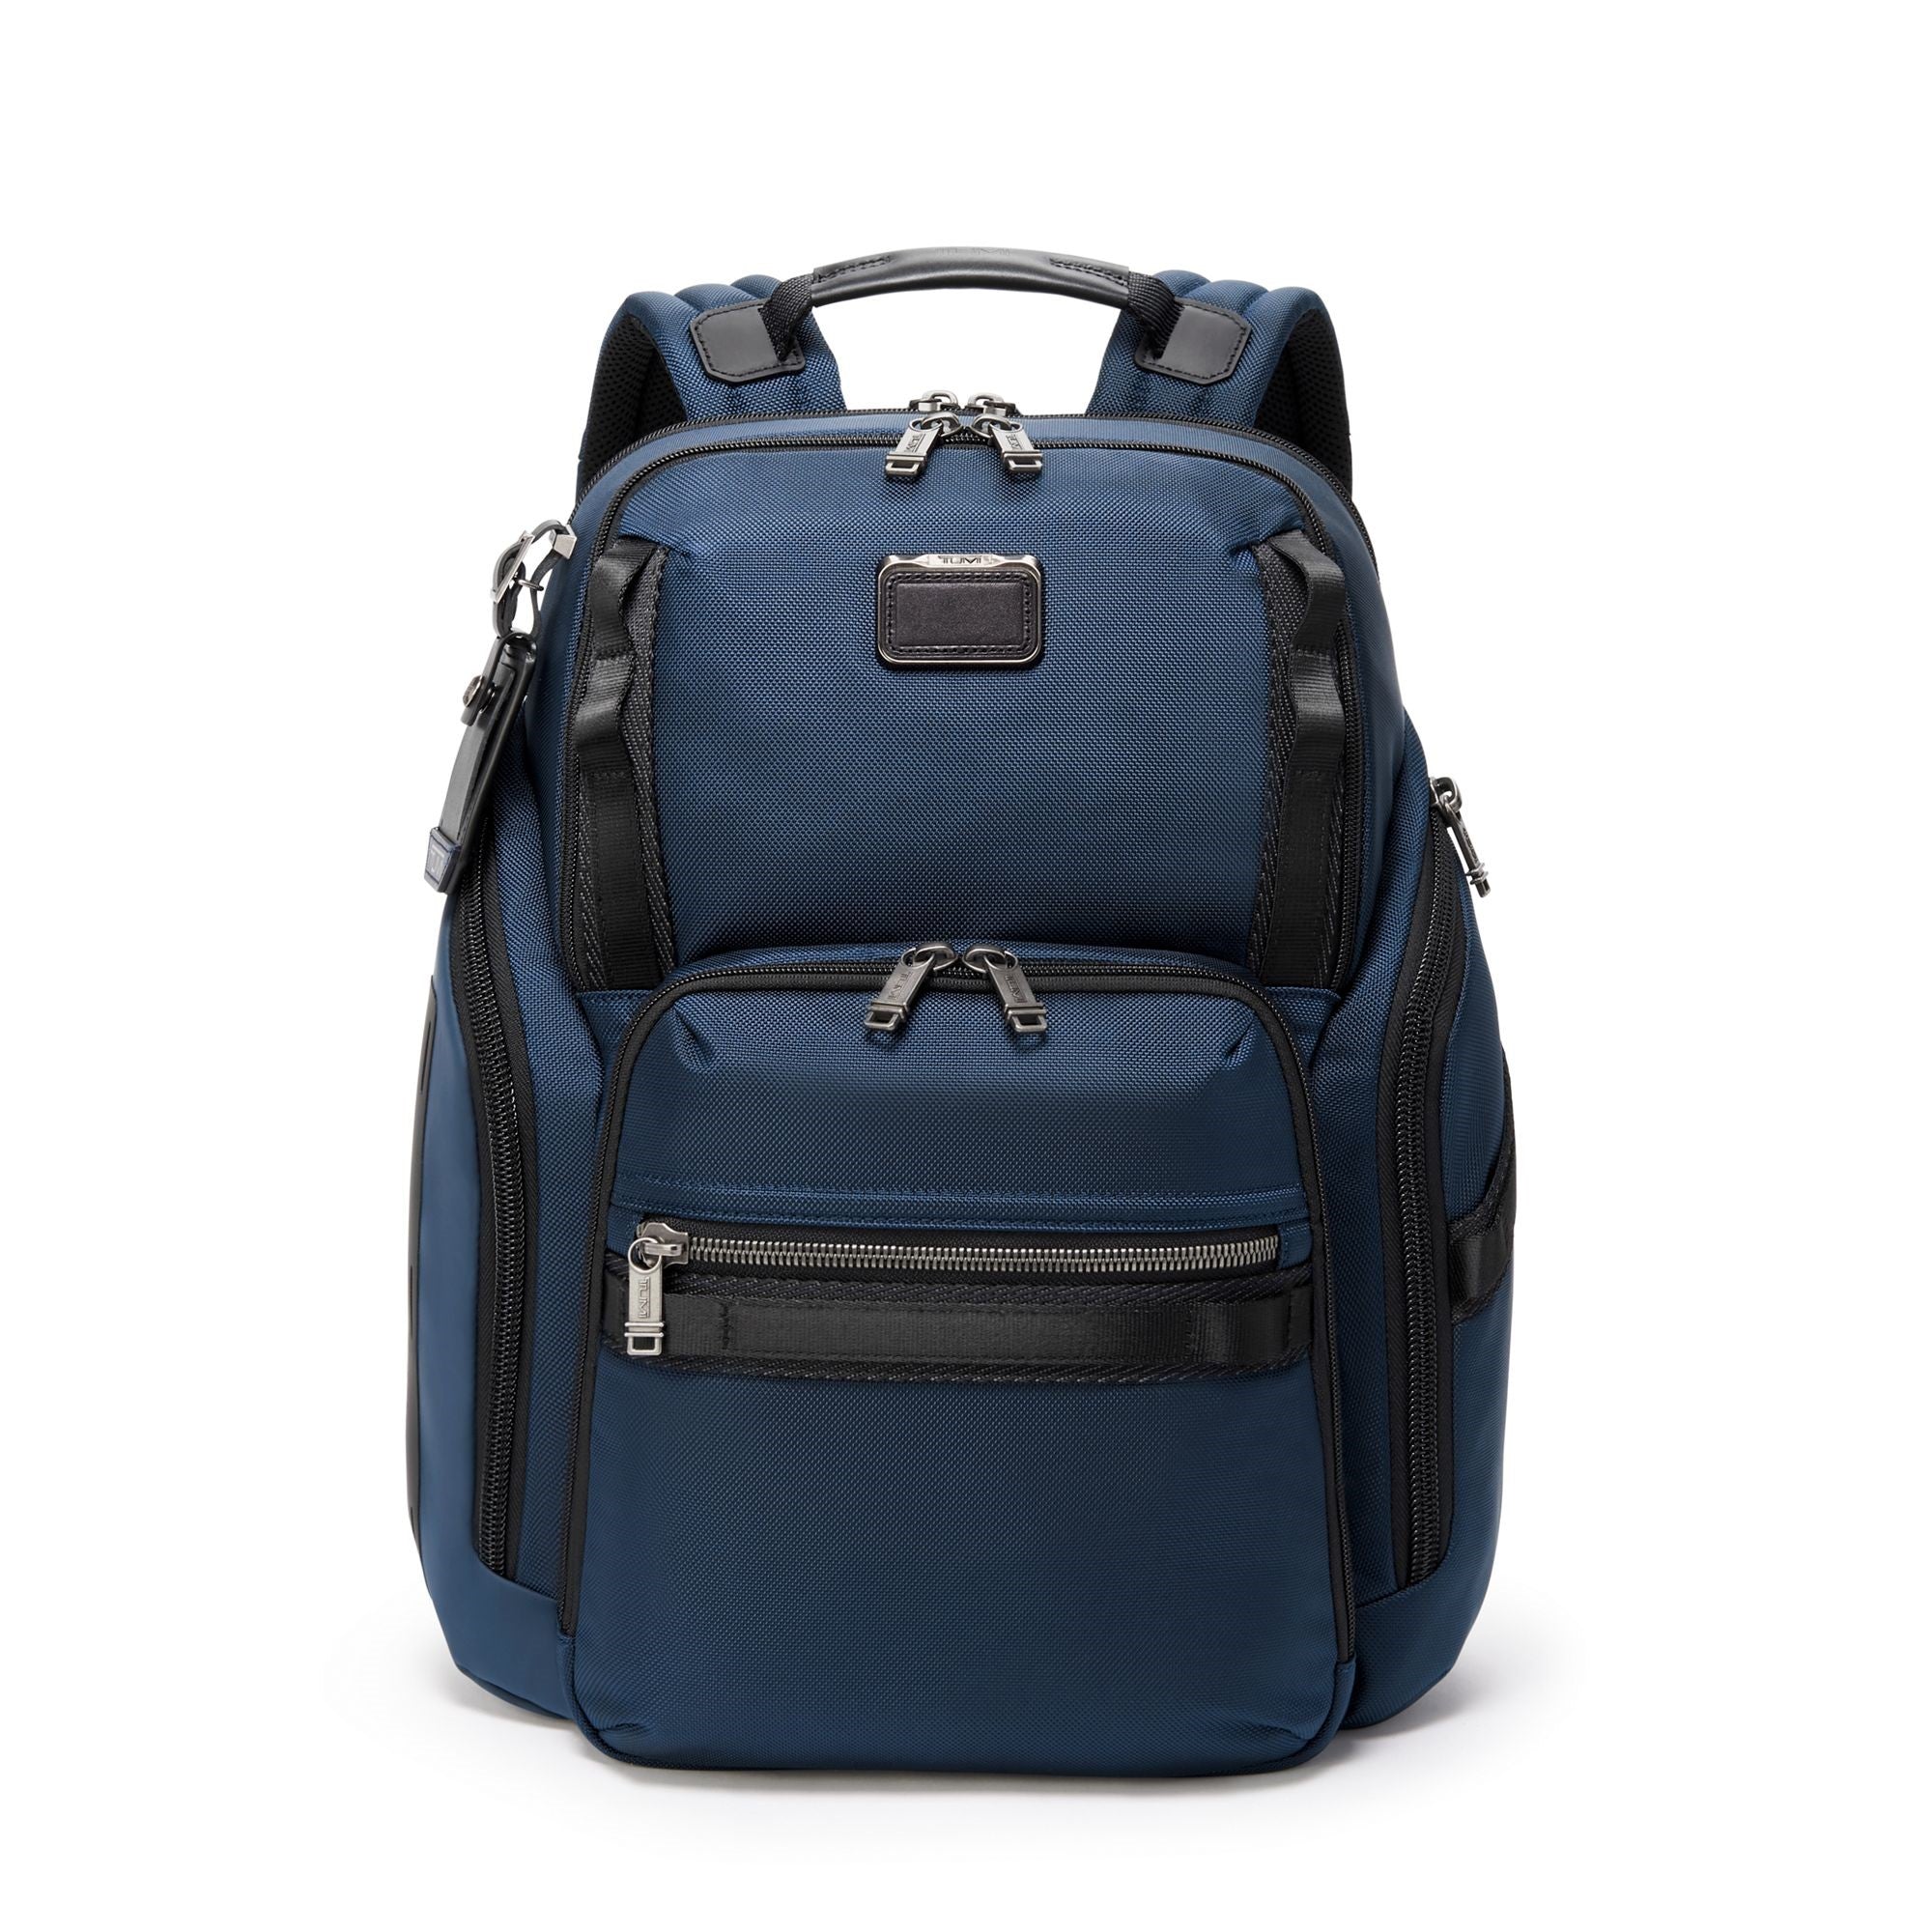 Tumi Alpha Bravo Search Backpack | Airline Intl